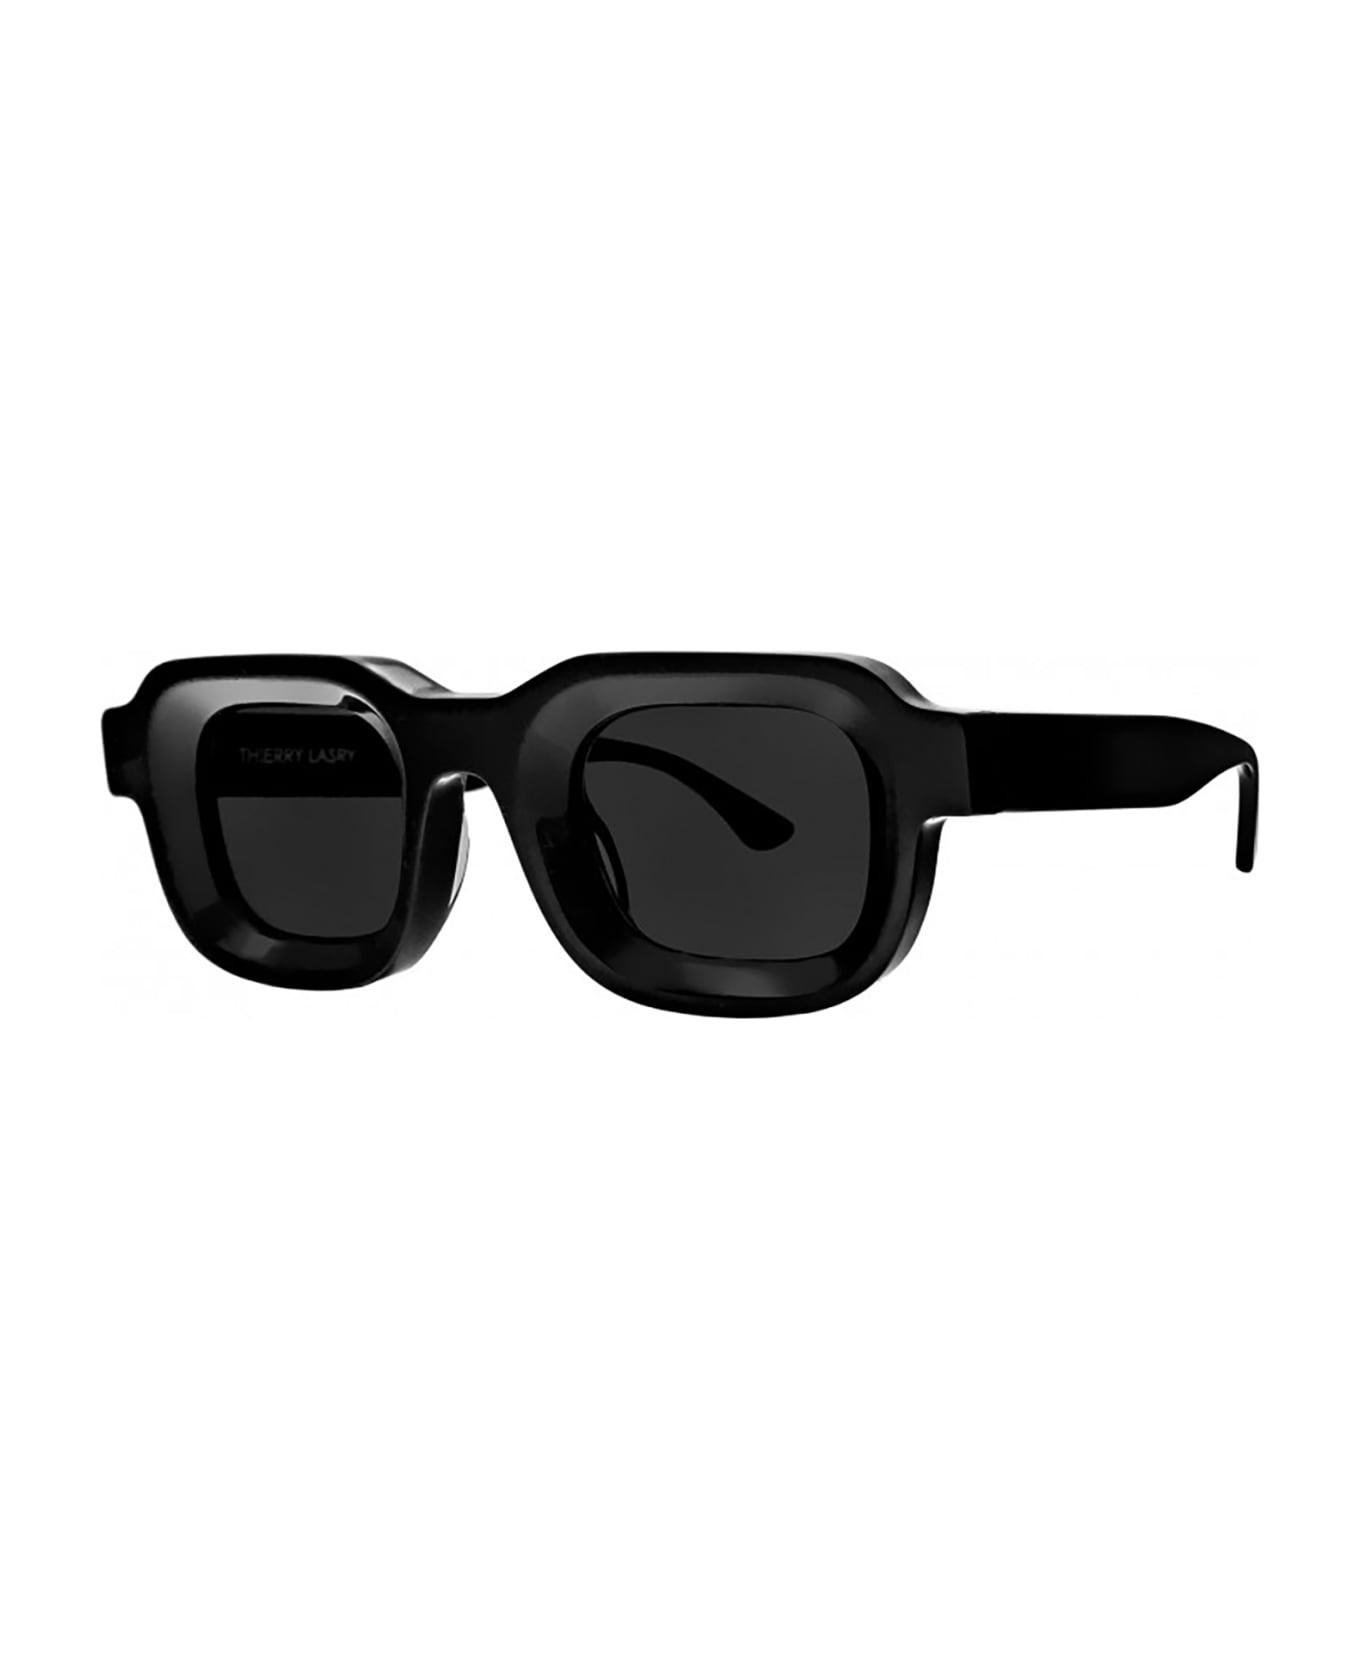 Thierry Lasry NARCOTY Sunglasses